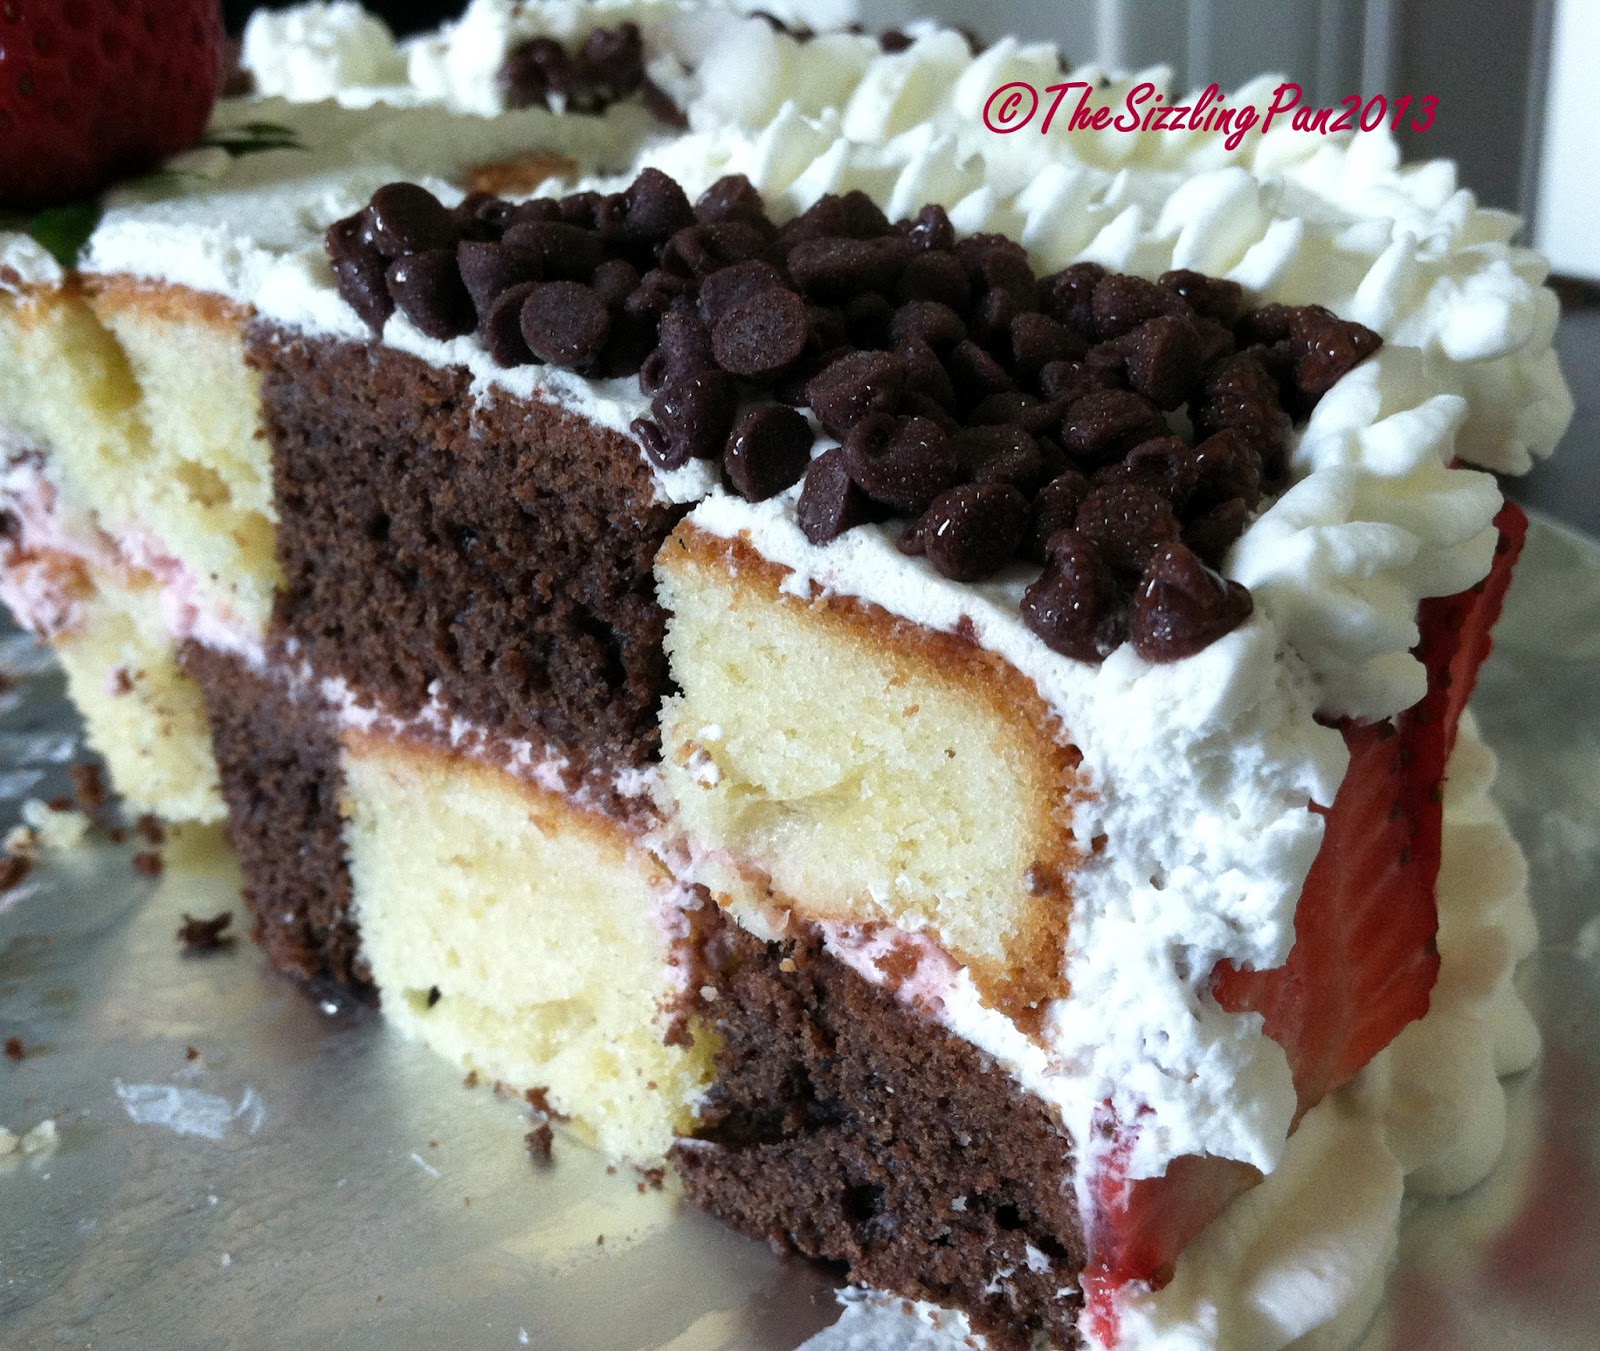 The Sizzling Pan: Vanilla and Chocolate "Checkerboard" Cake with